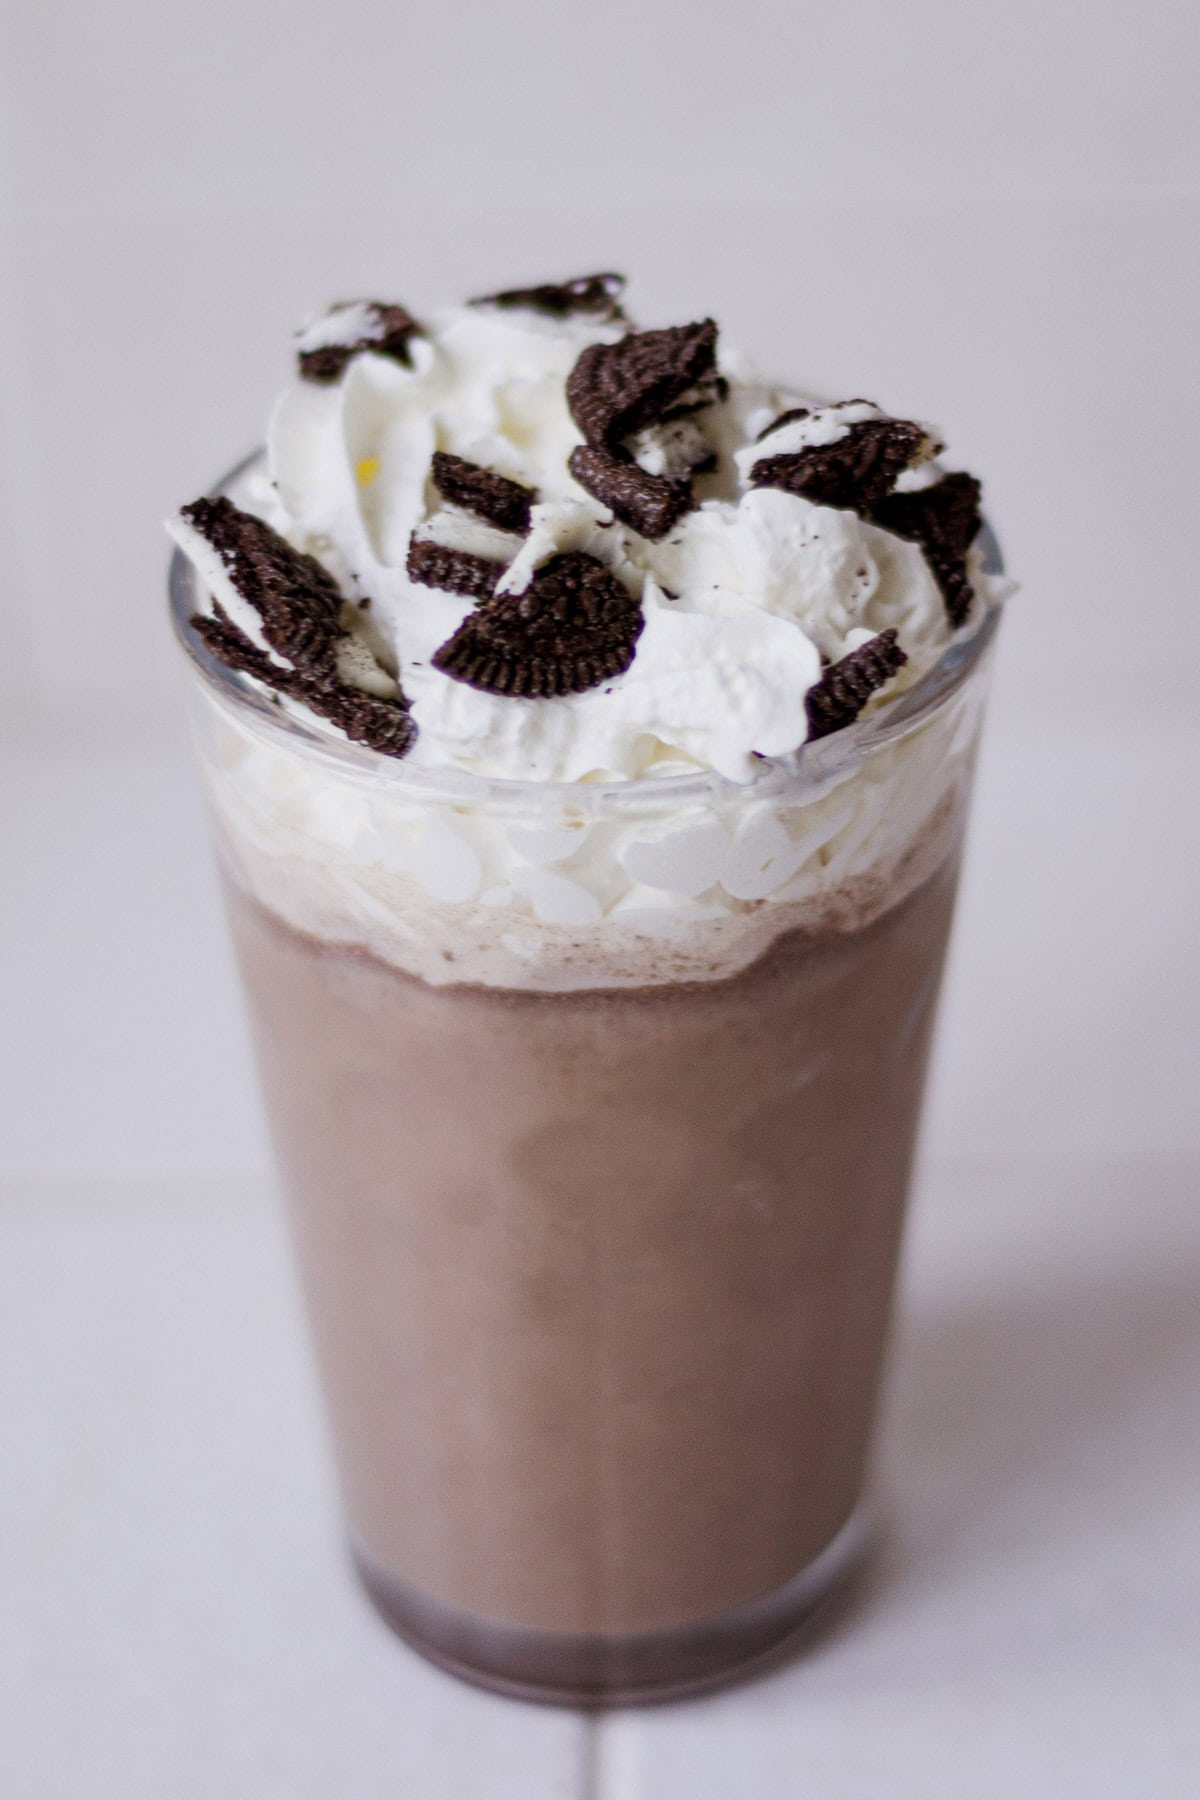 Oreo milk tea in a glass, topped with whipped cream and a crushed Oreo.